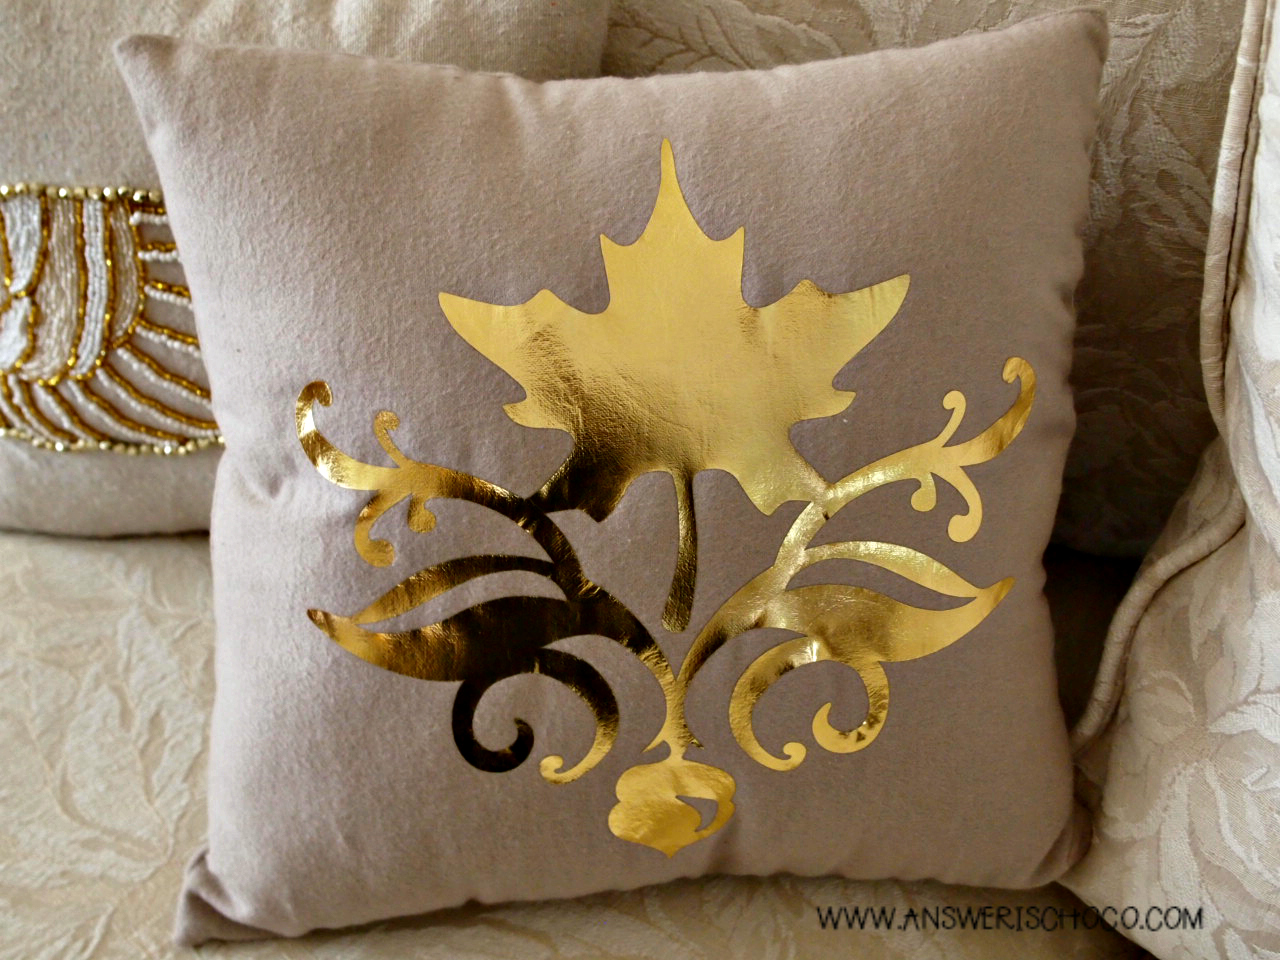 How To Use Heat Transfer Pillows 